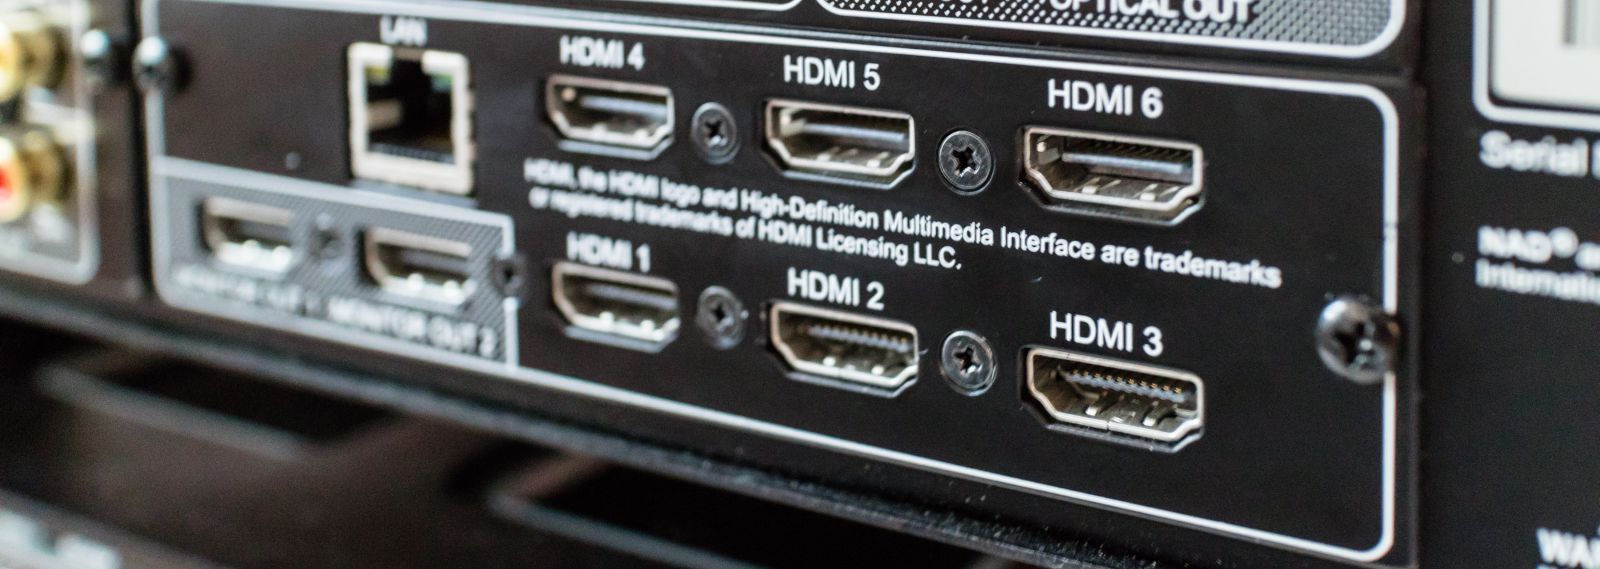 back of the LCD TV with HDMI connectors